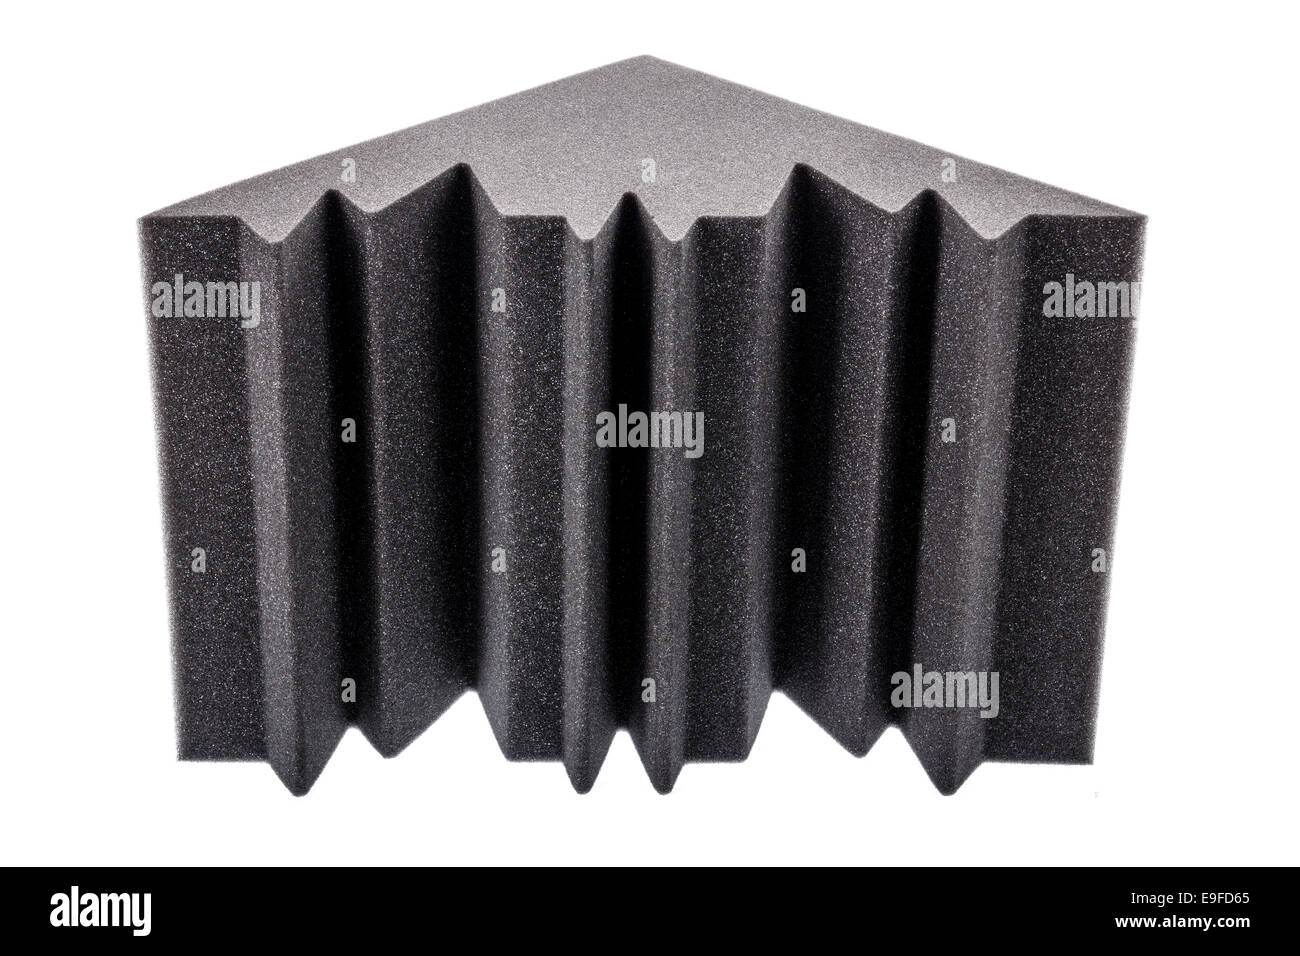 microfiber foam insulation for noise in the corners of the music studio or acoustic halls, rooms or houses Stock Photo